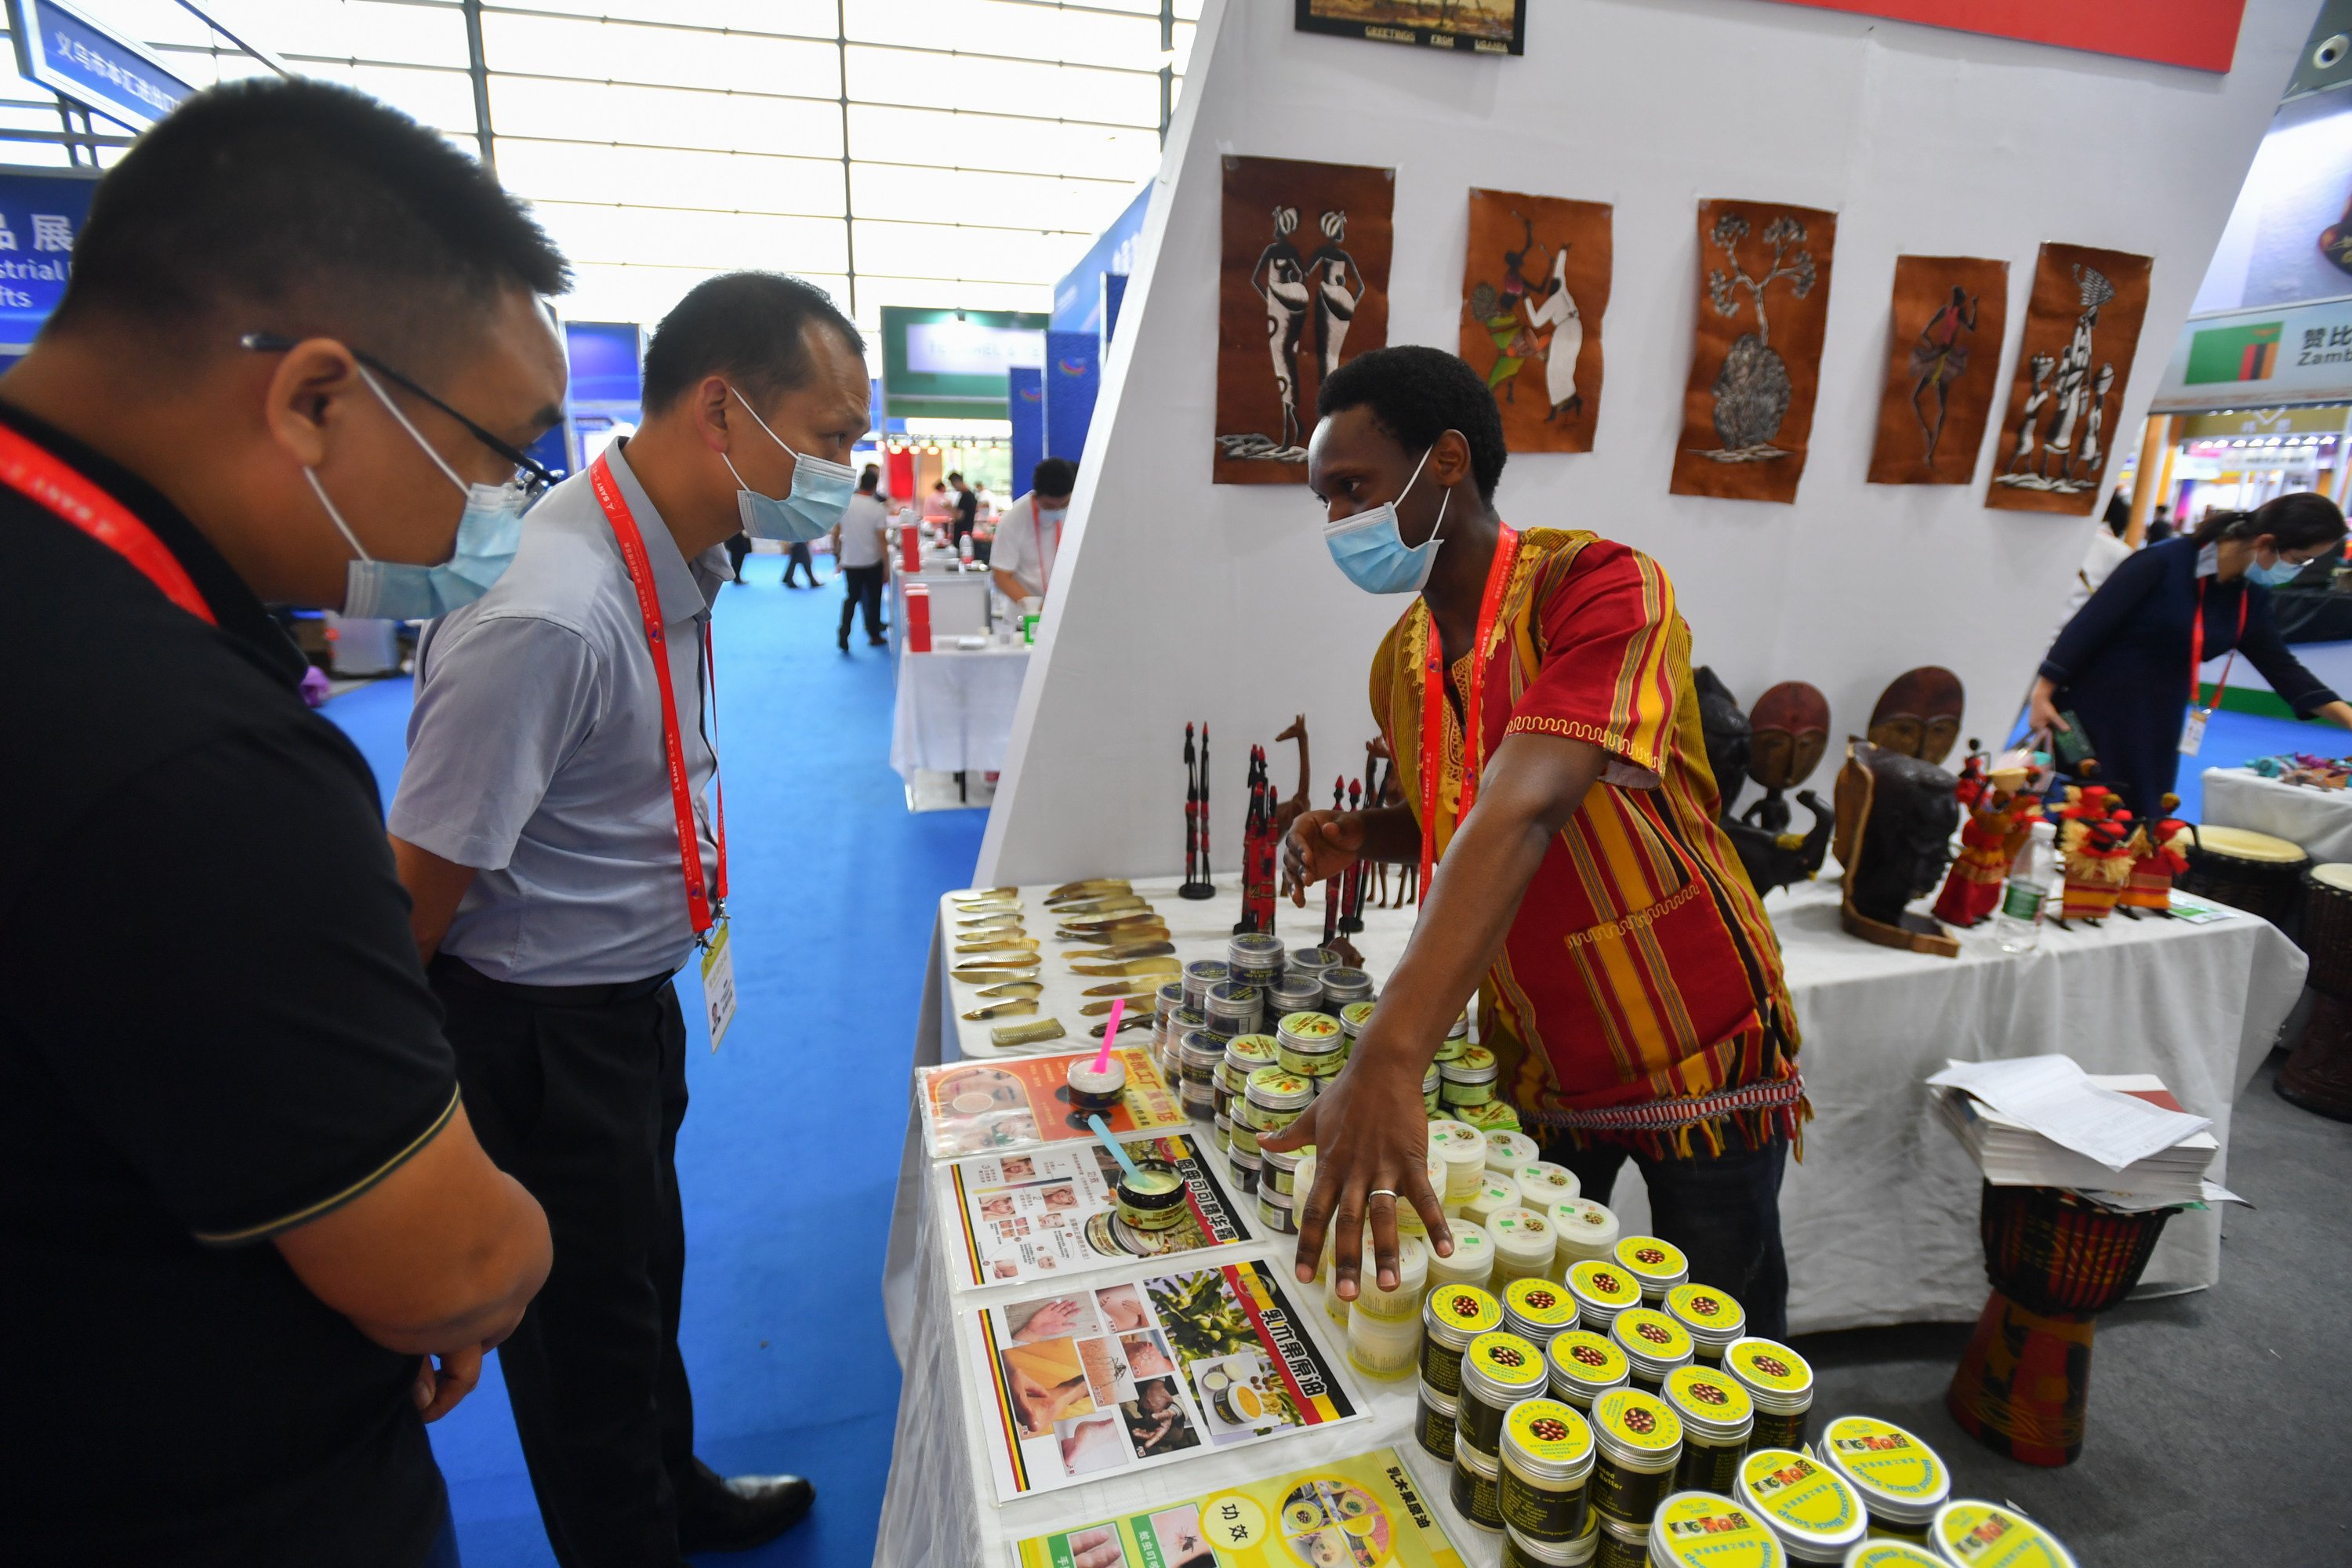 An exhibitor introduces skincare products made in Africa during the second China-Africa Economic and Trade Expo in Changsha, the capital of central China’s Hunan province, on September 27, 2021. Photo: Xinhua